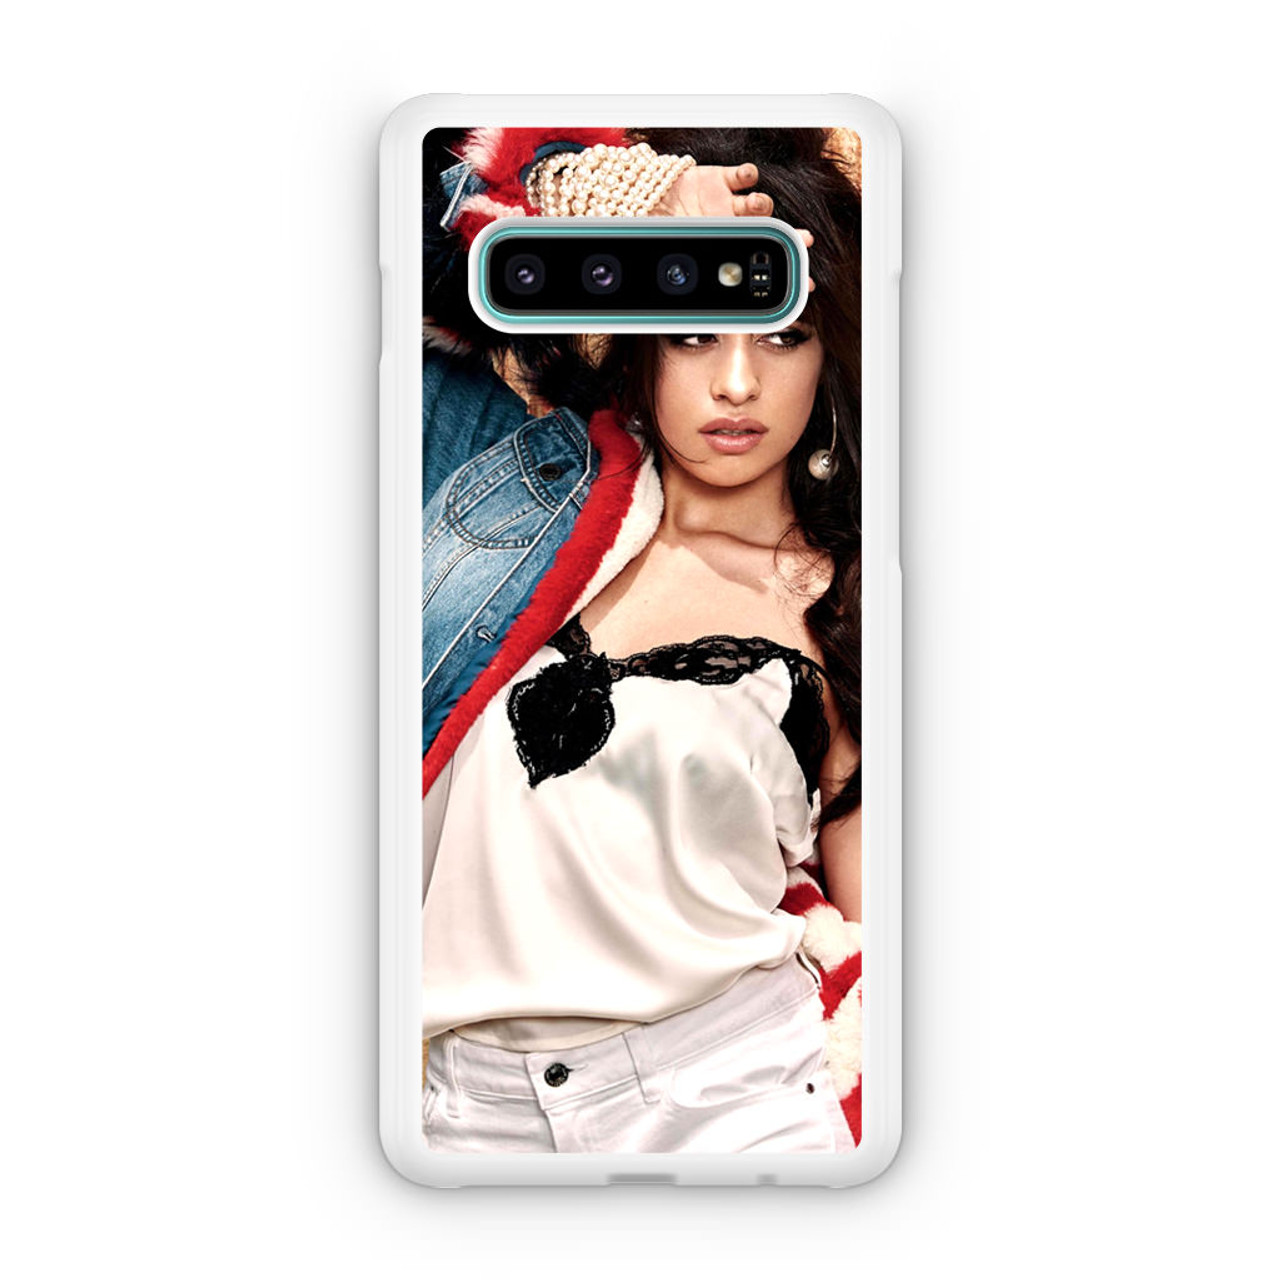 Fortryd evne sundhed Camila Cabello Guess Campaign Samsung Galaxy S10 Plus Case - CASESHUNTER